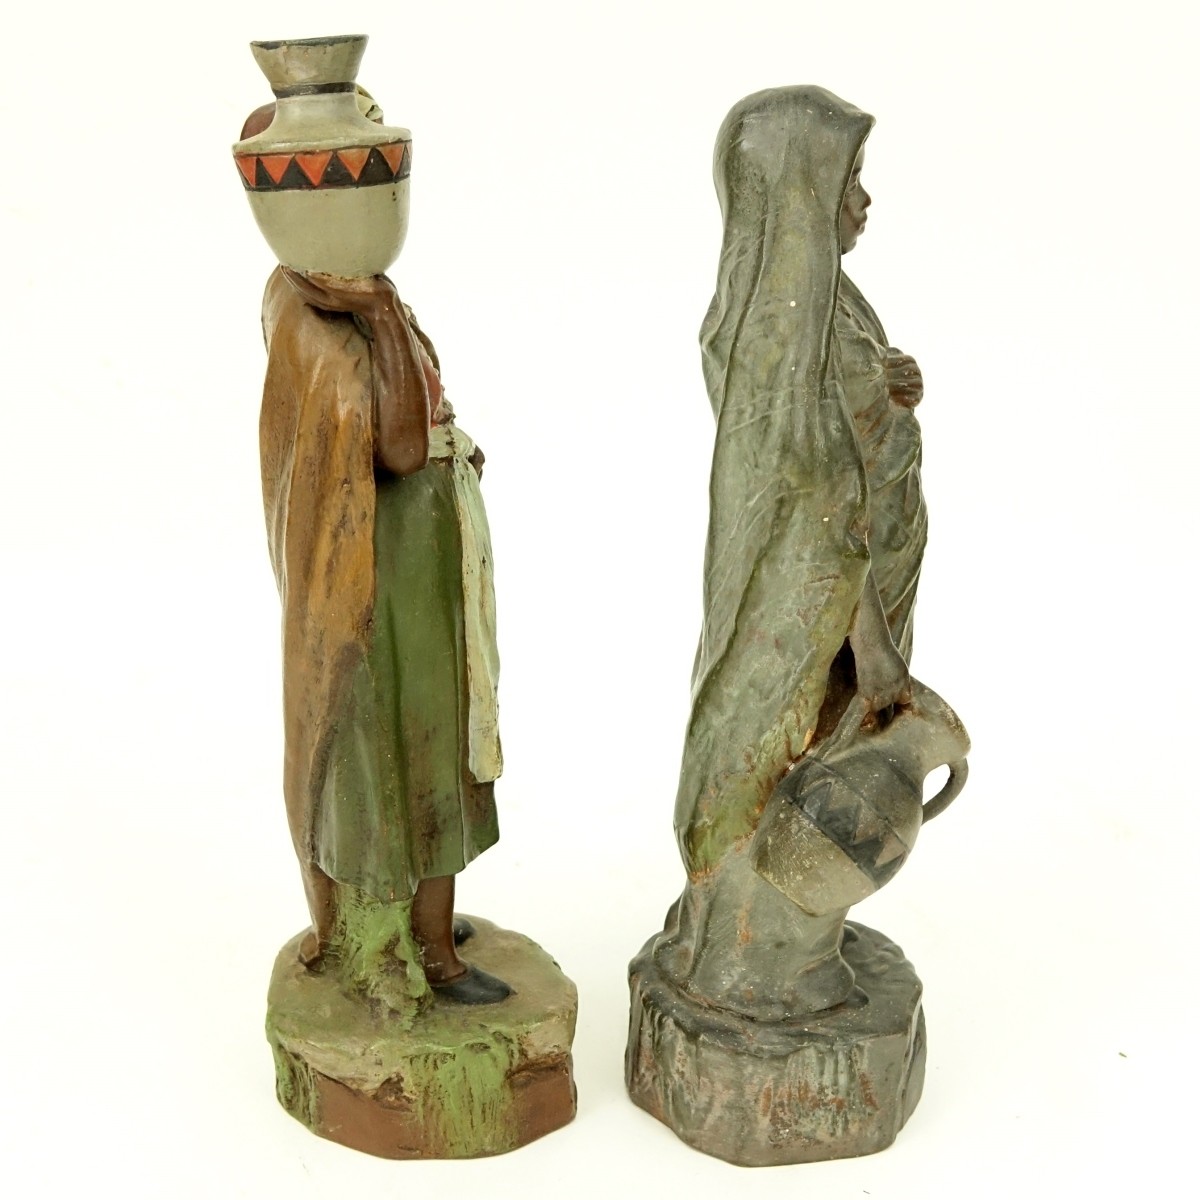 Two Vintage Polychrome Pottery Bedouin Figures